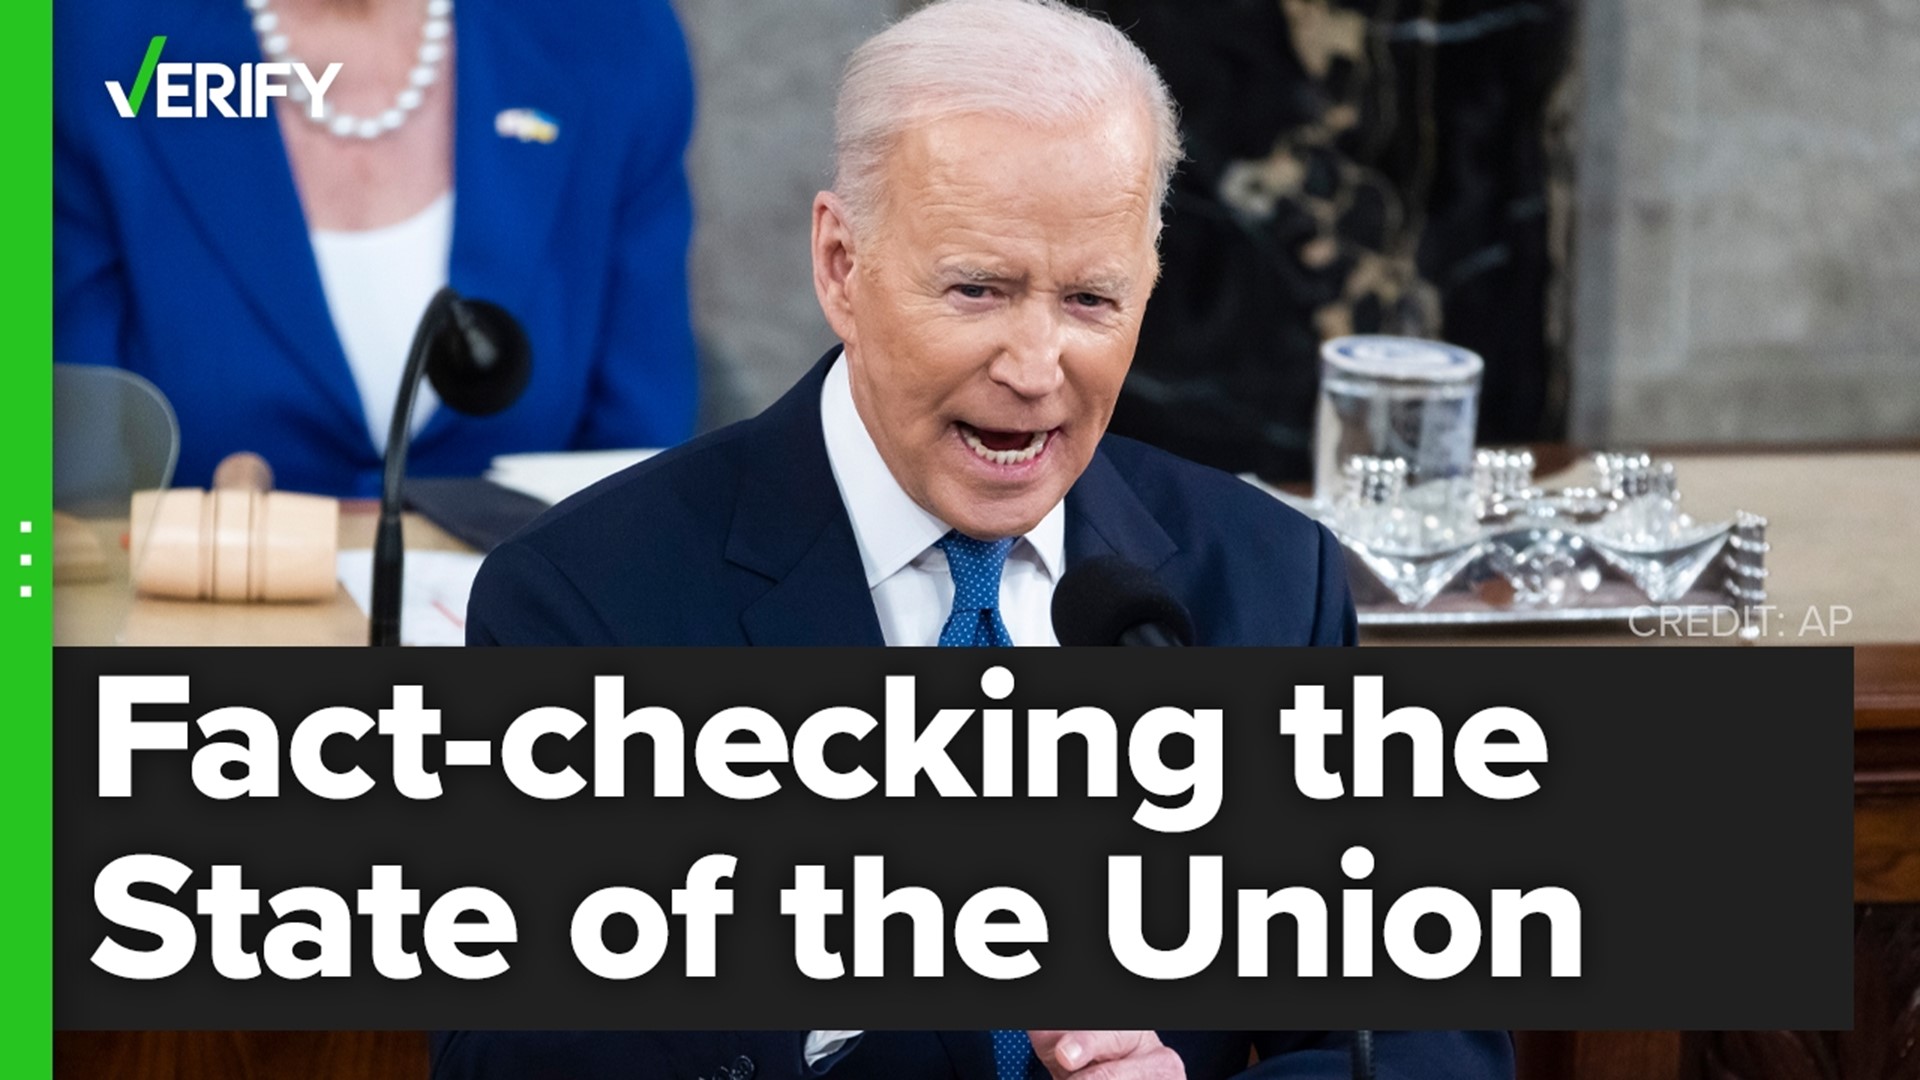 The VERIFY team analyzed claims from Biden’s first State of the Union address as president.